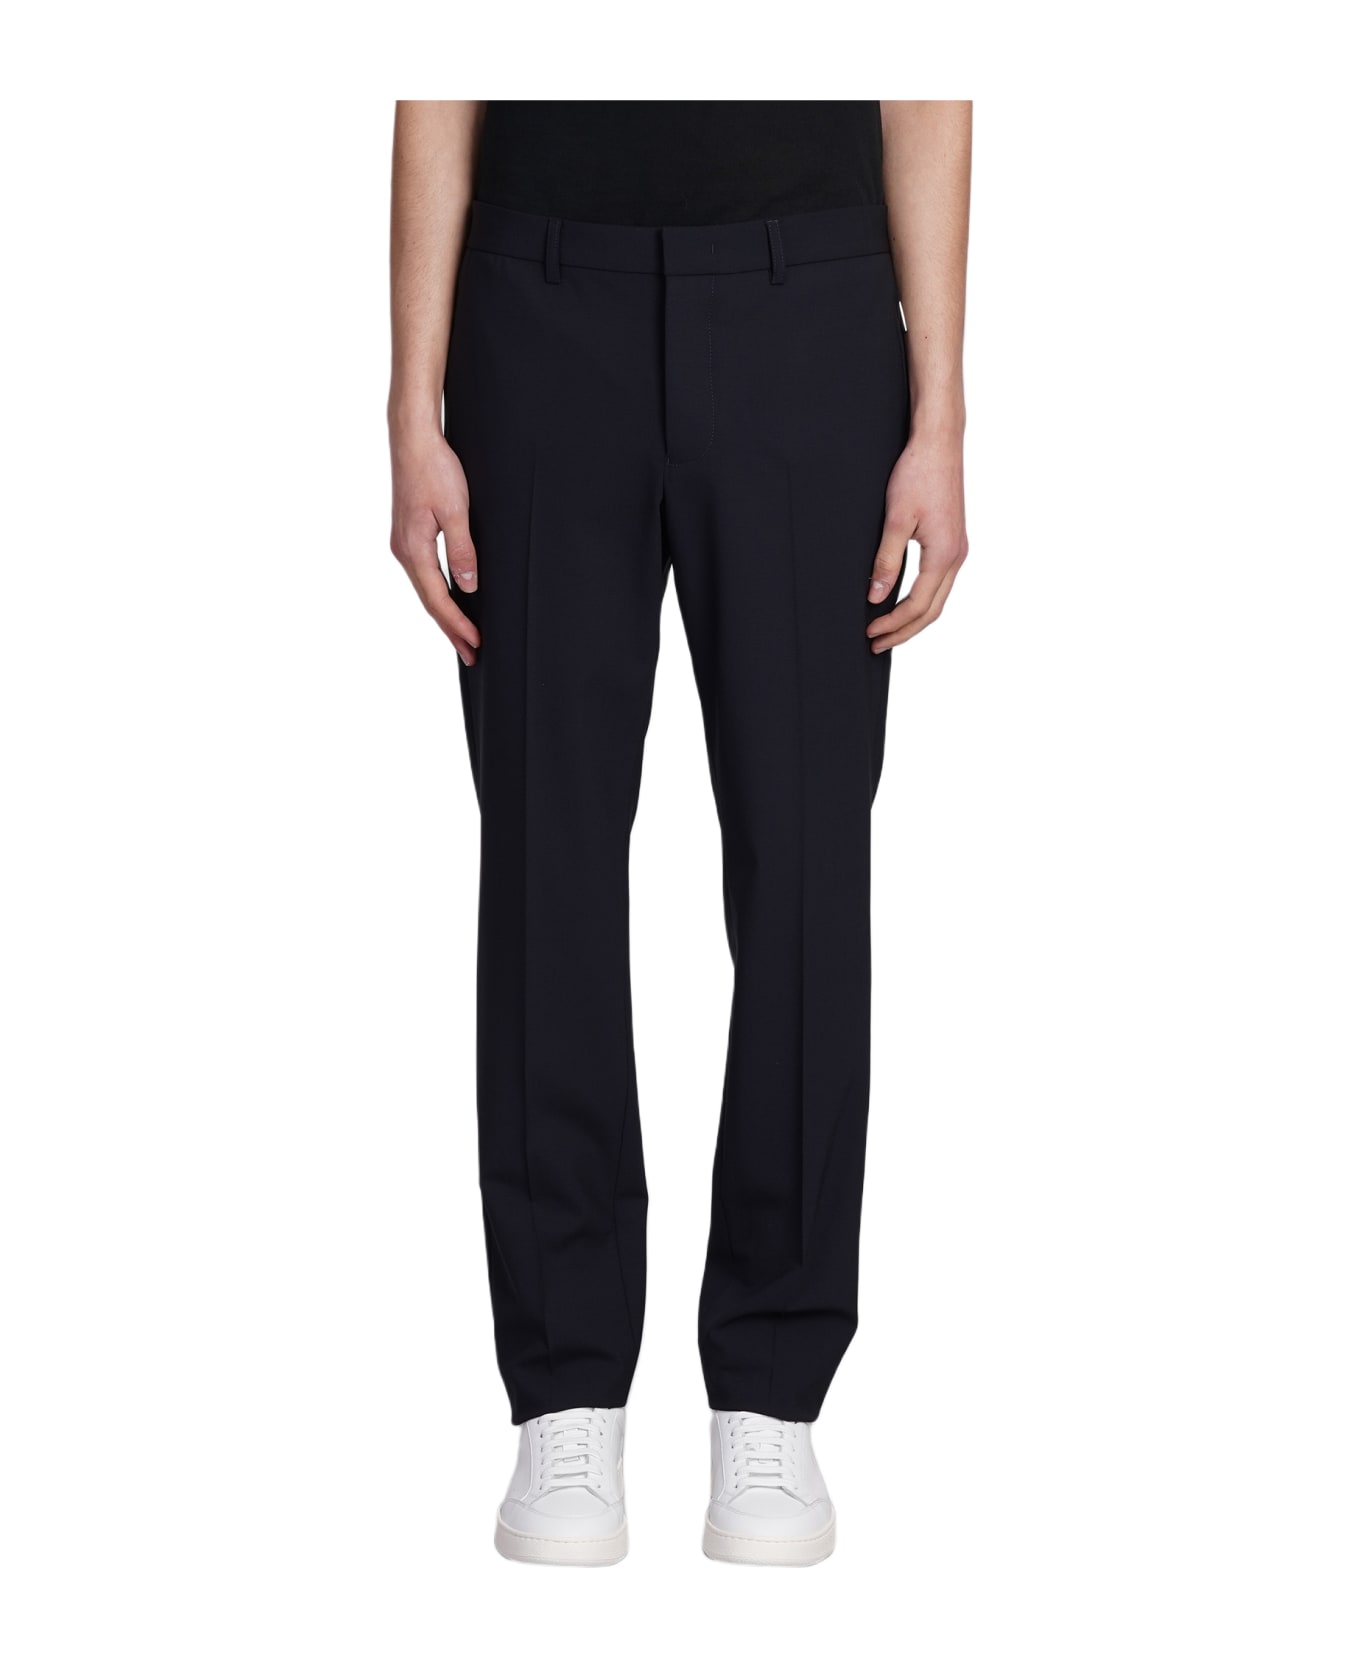 Emporio Armani Pants In Blue Wool - blue